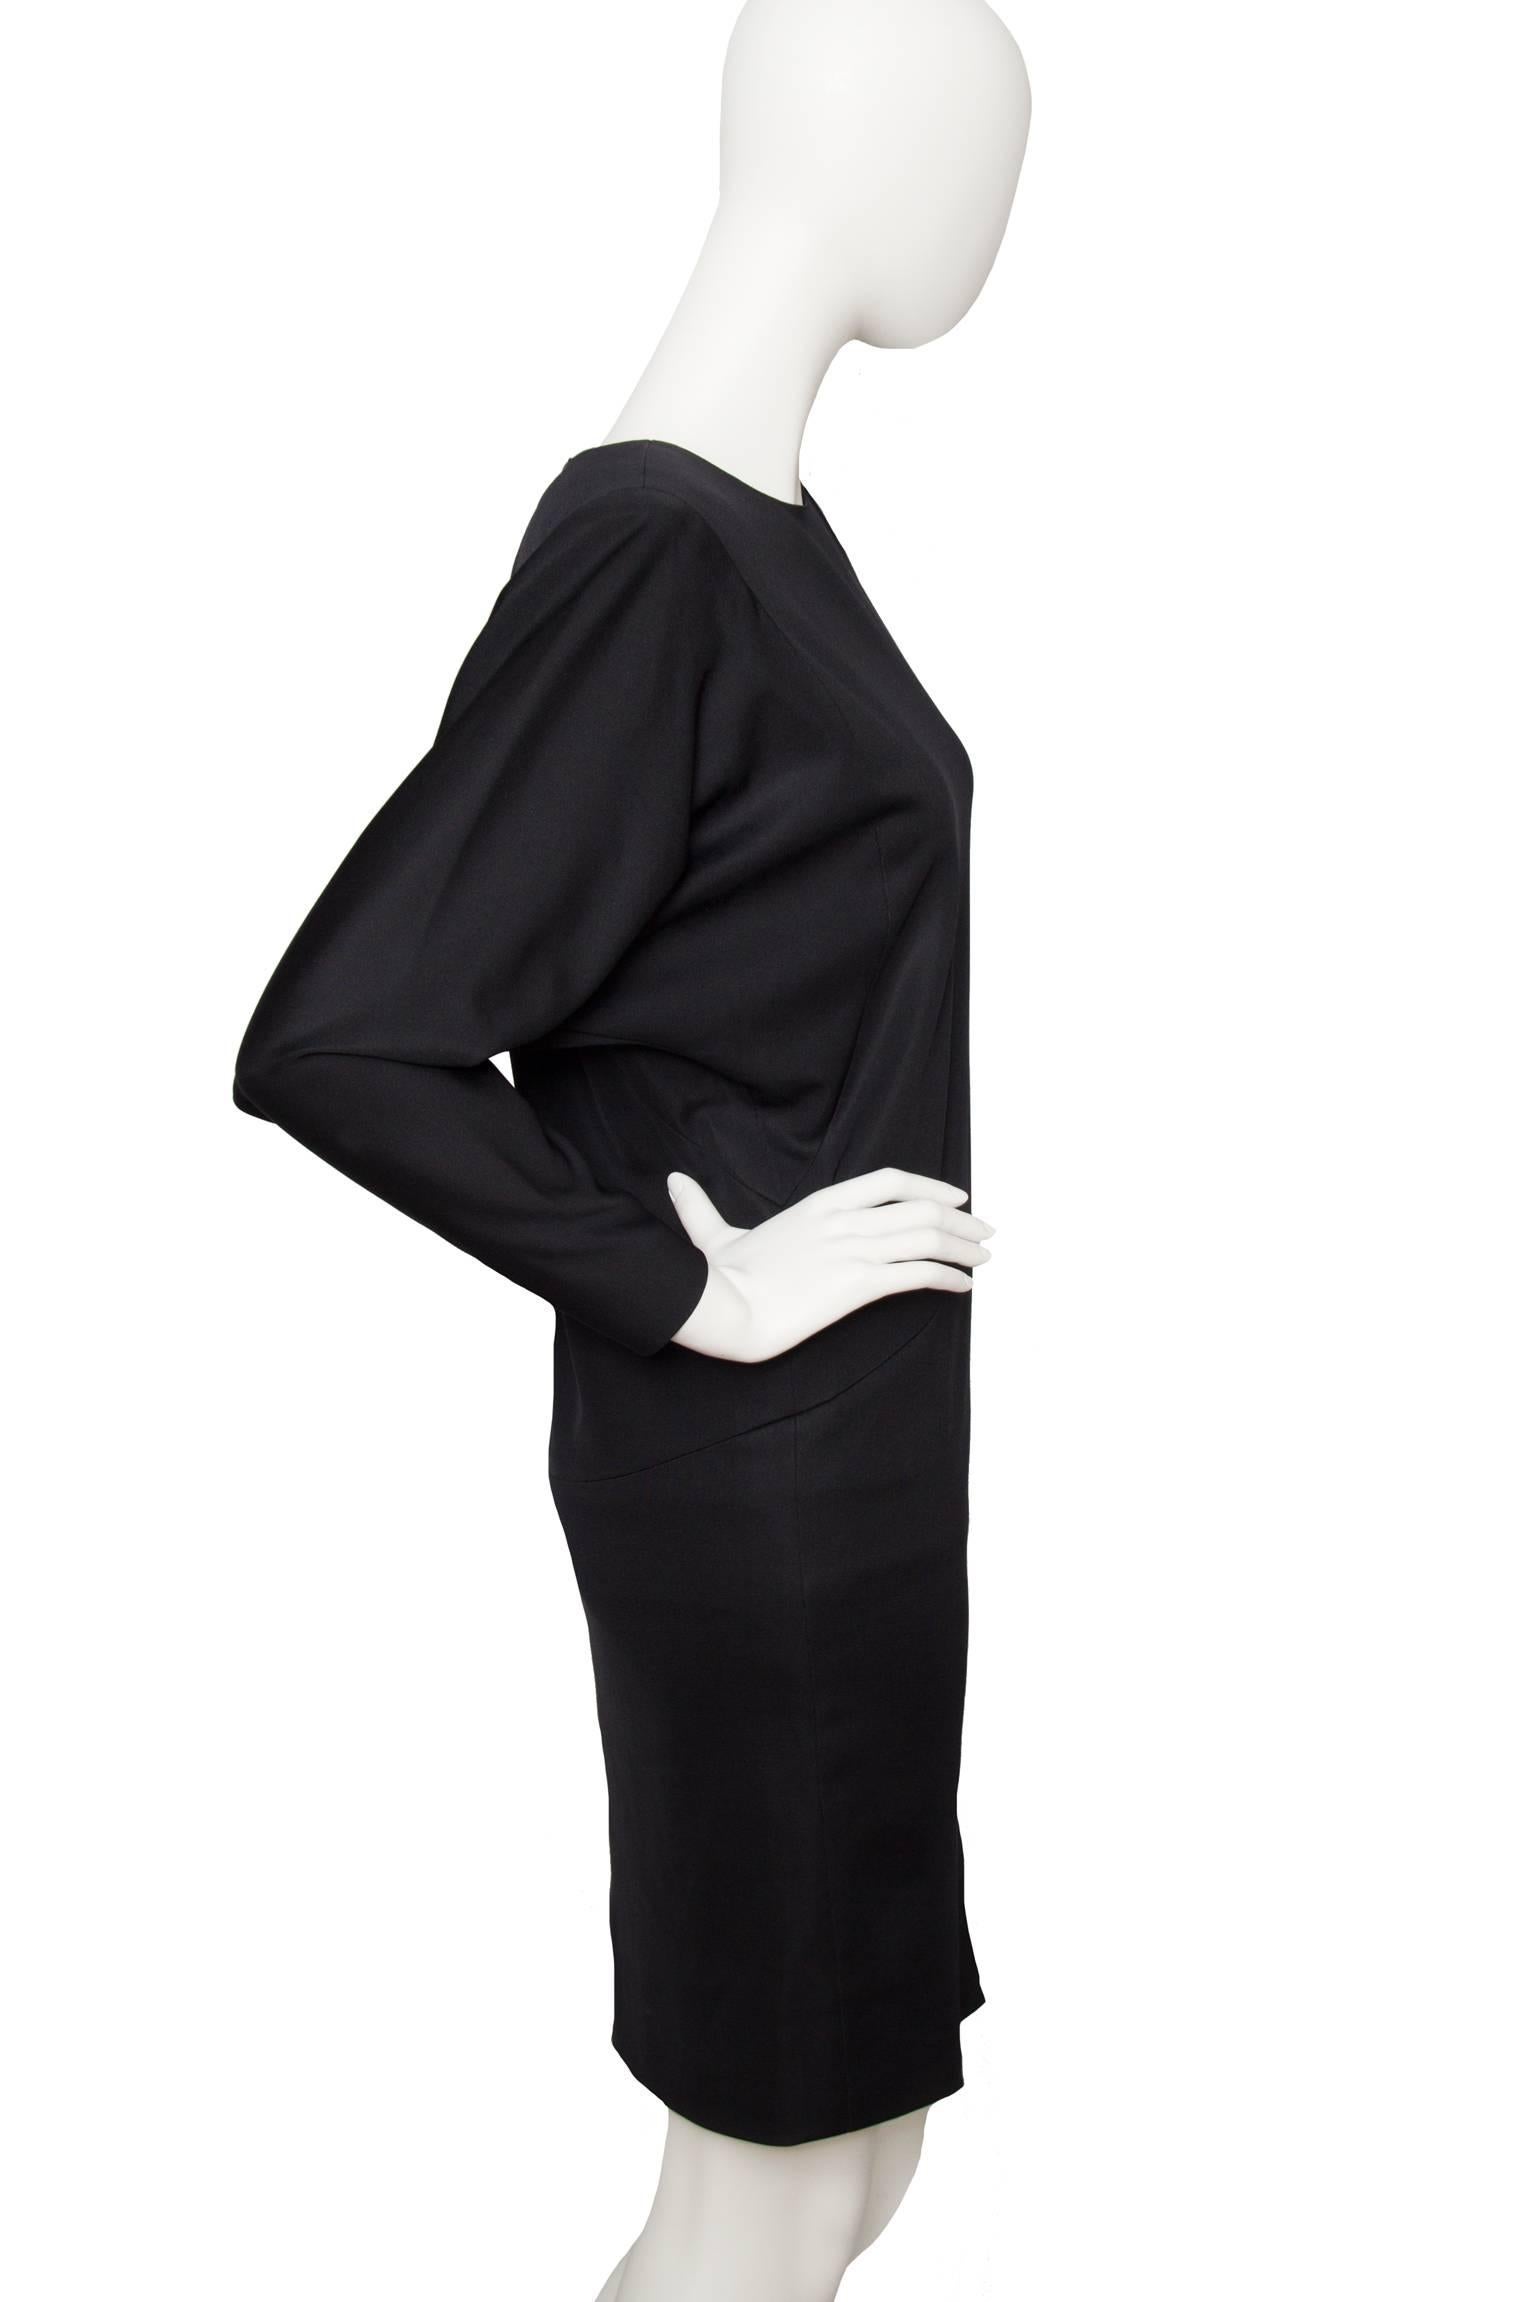 A 1980s black Yves Saint Laurent haute couture cocktail dress with a drop waist fitted skirt and a voluminous top with long sleeves tapered at the cuff. The dress has a round neckline, zipper details at the cuff and a zipper closure situated at the